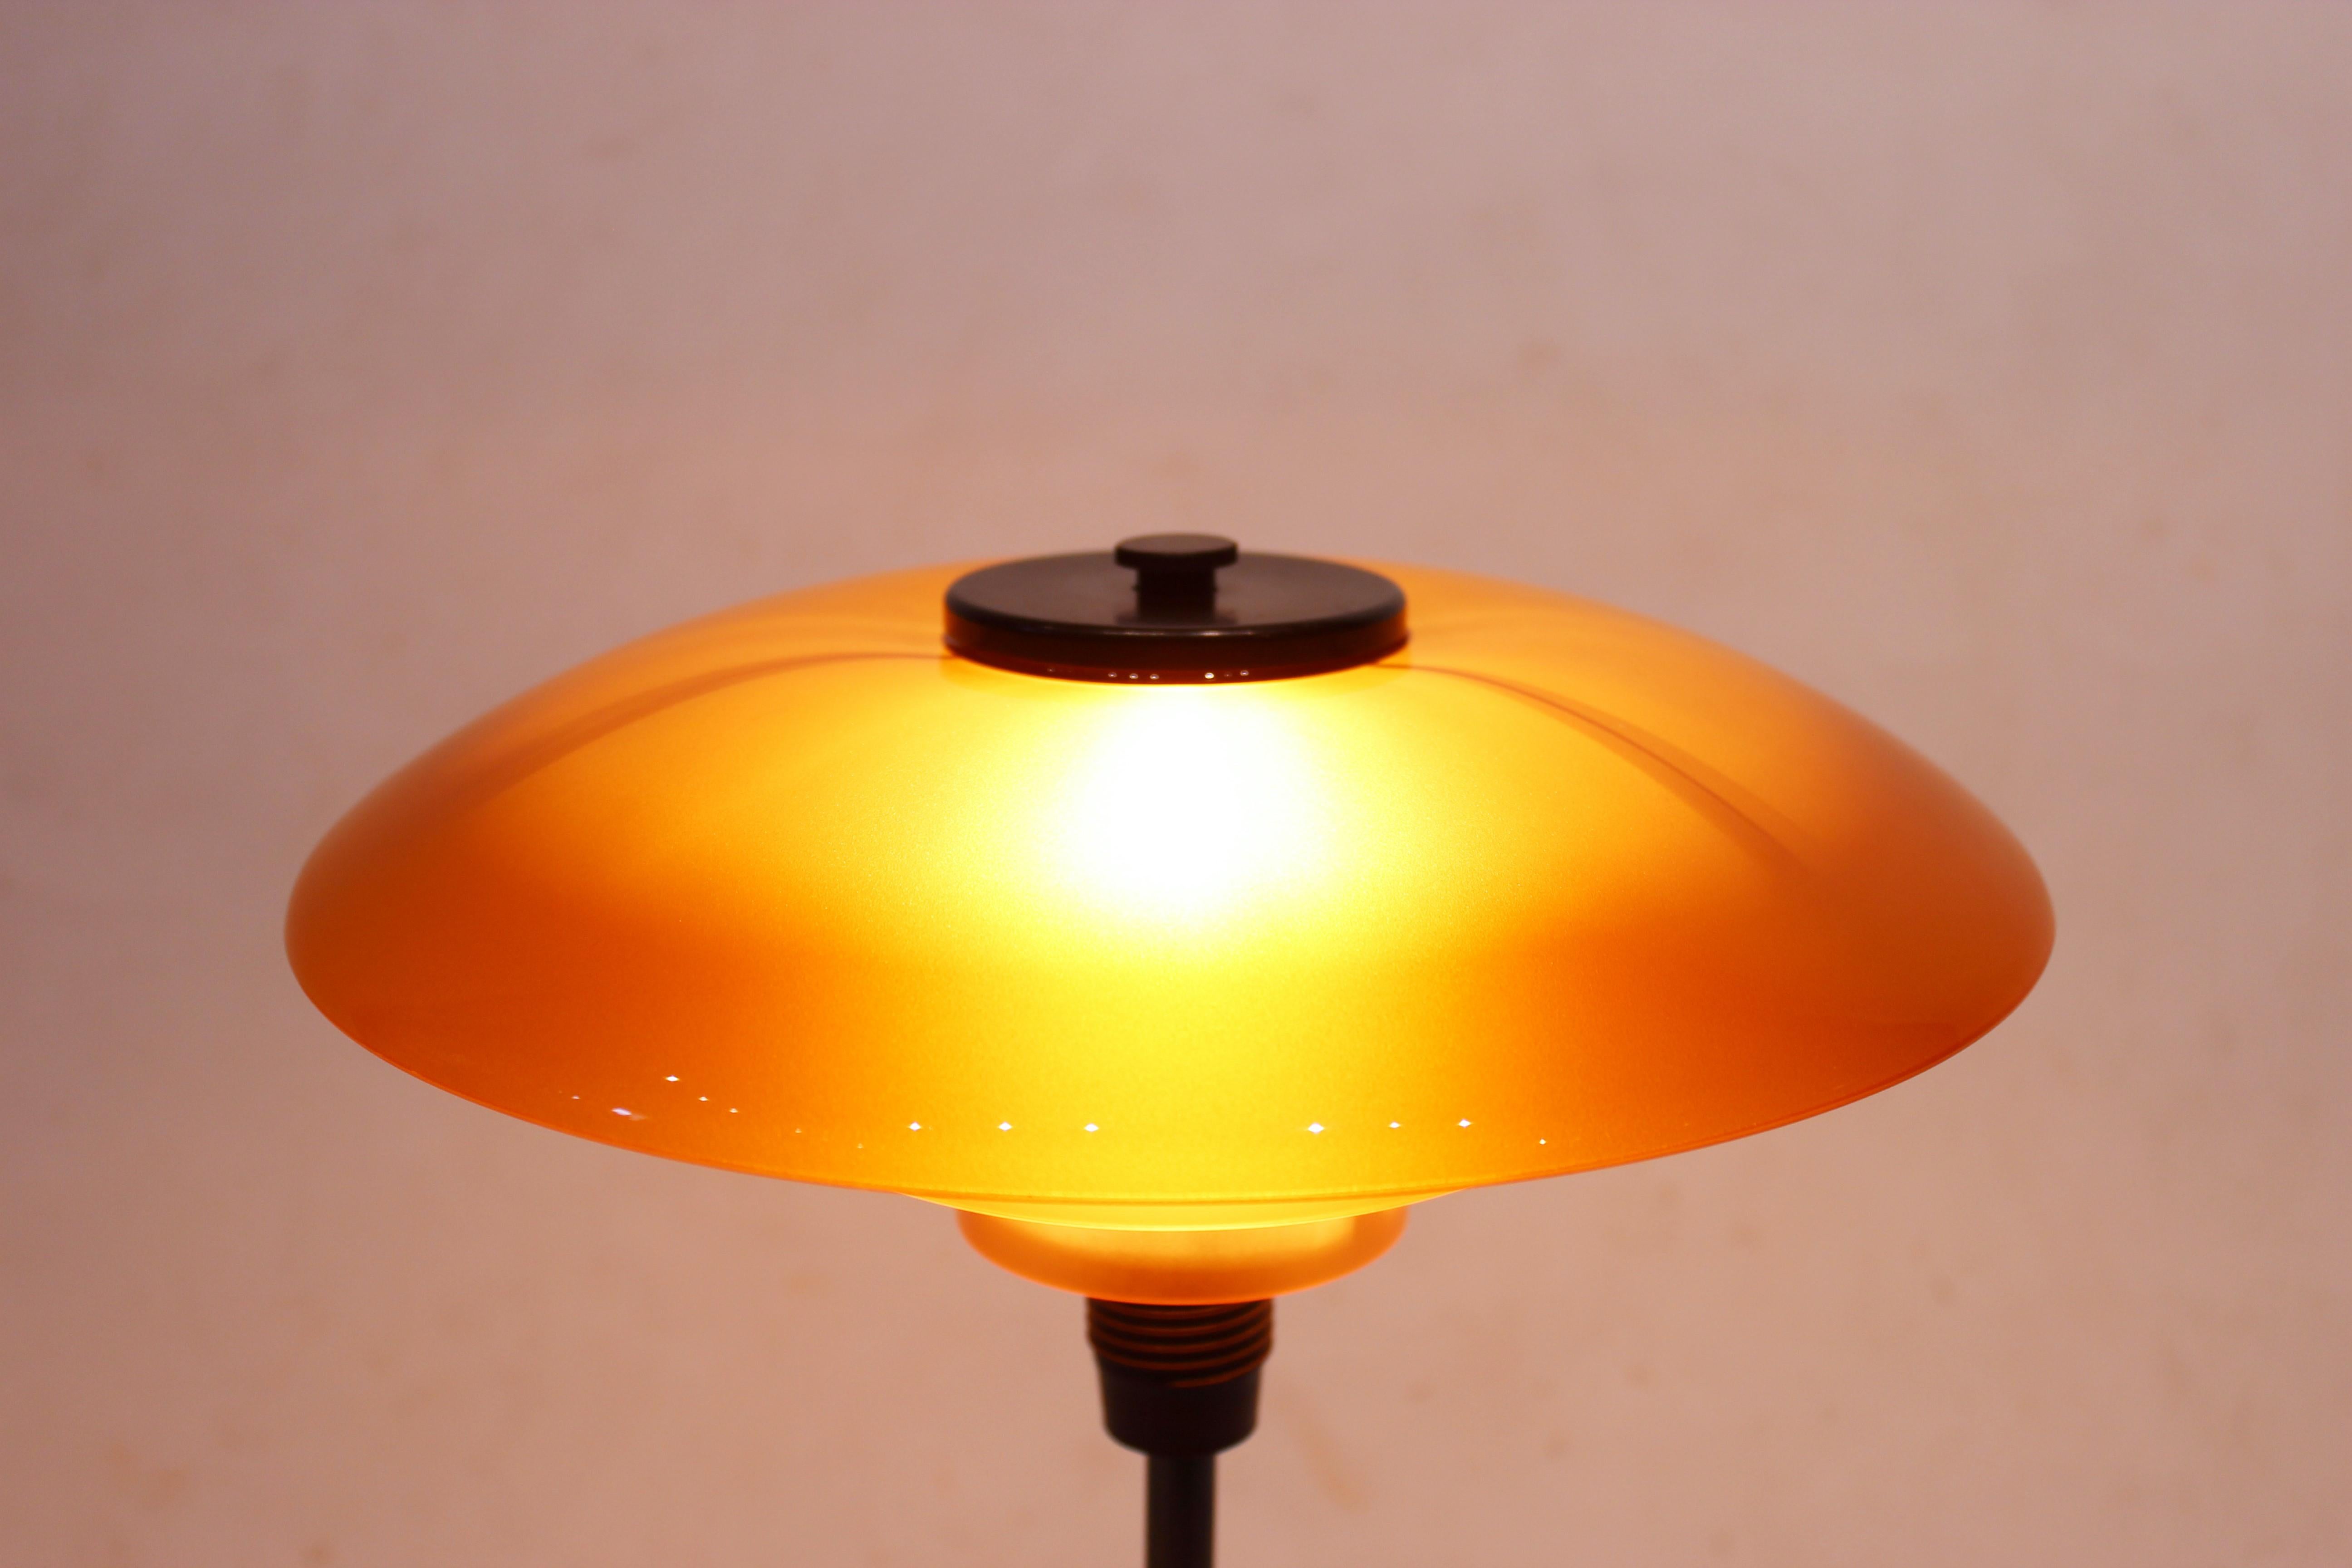 Scandinavian Modern PH 3/2 Tablelamp with Amber Colored Shades, by Poul Henningsen, 1930s